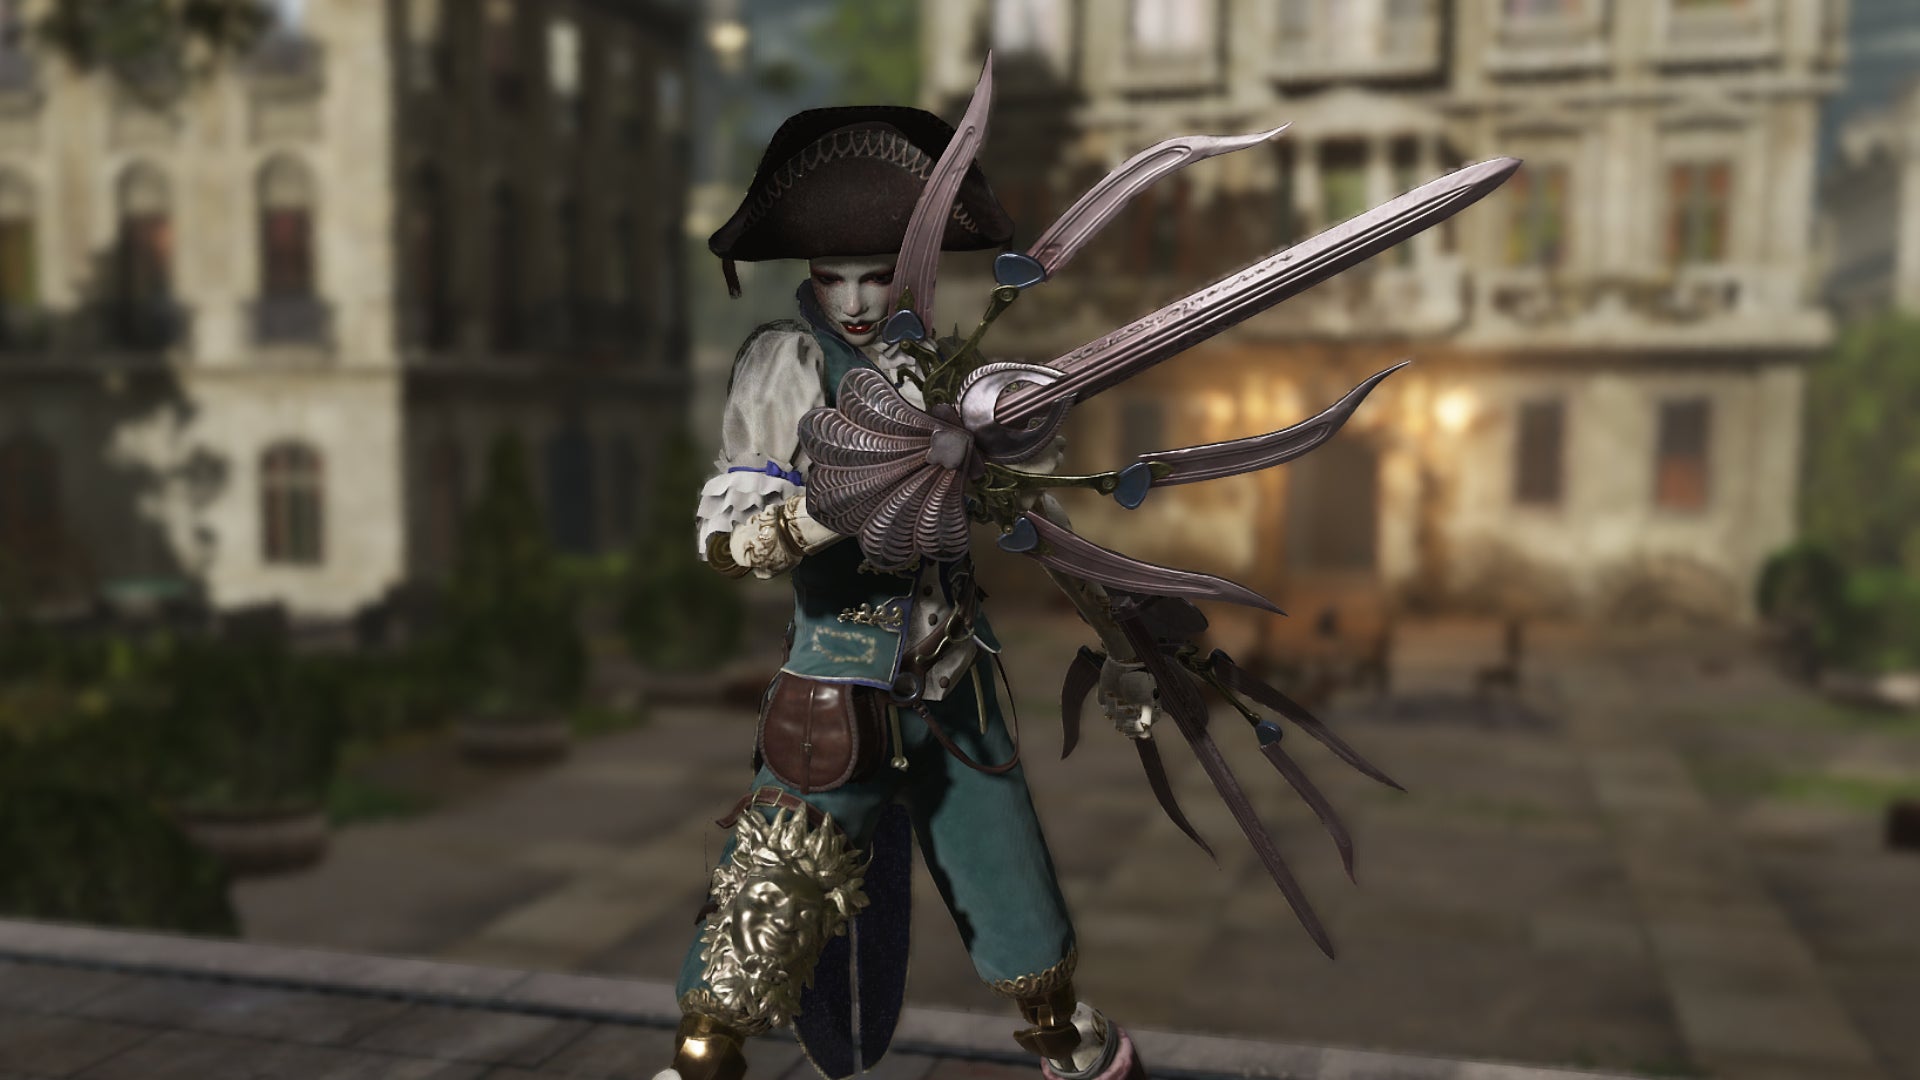 A screenshot of the player character in Steelrising brandishing the Nemesis Claws, a useable melee weapon.